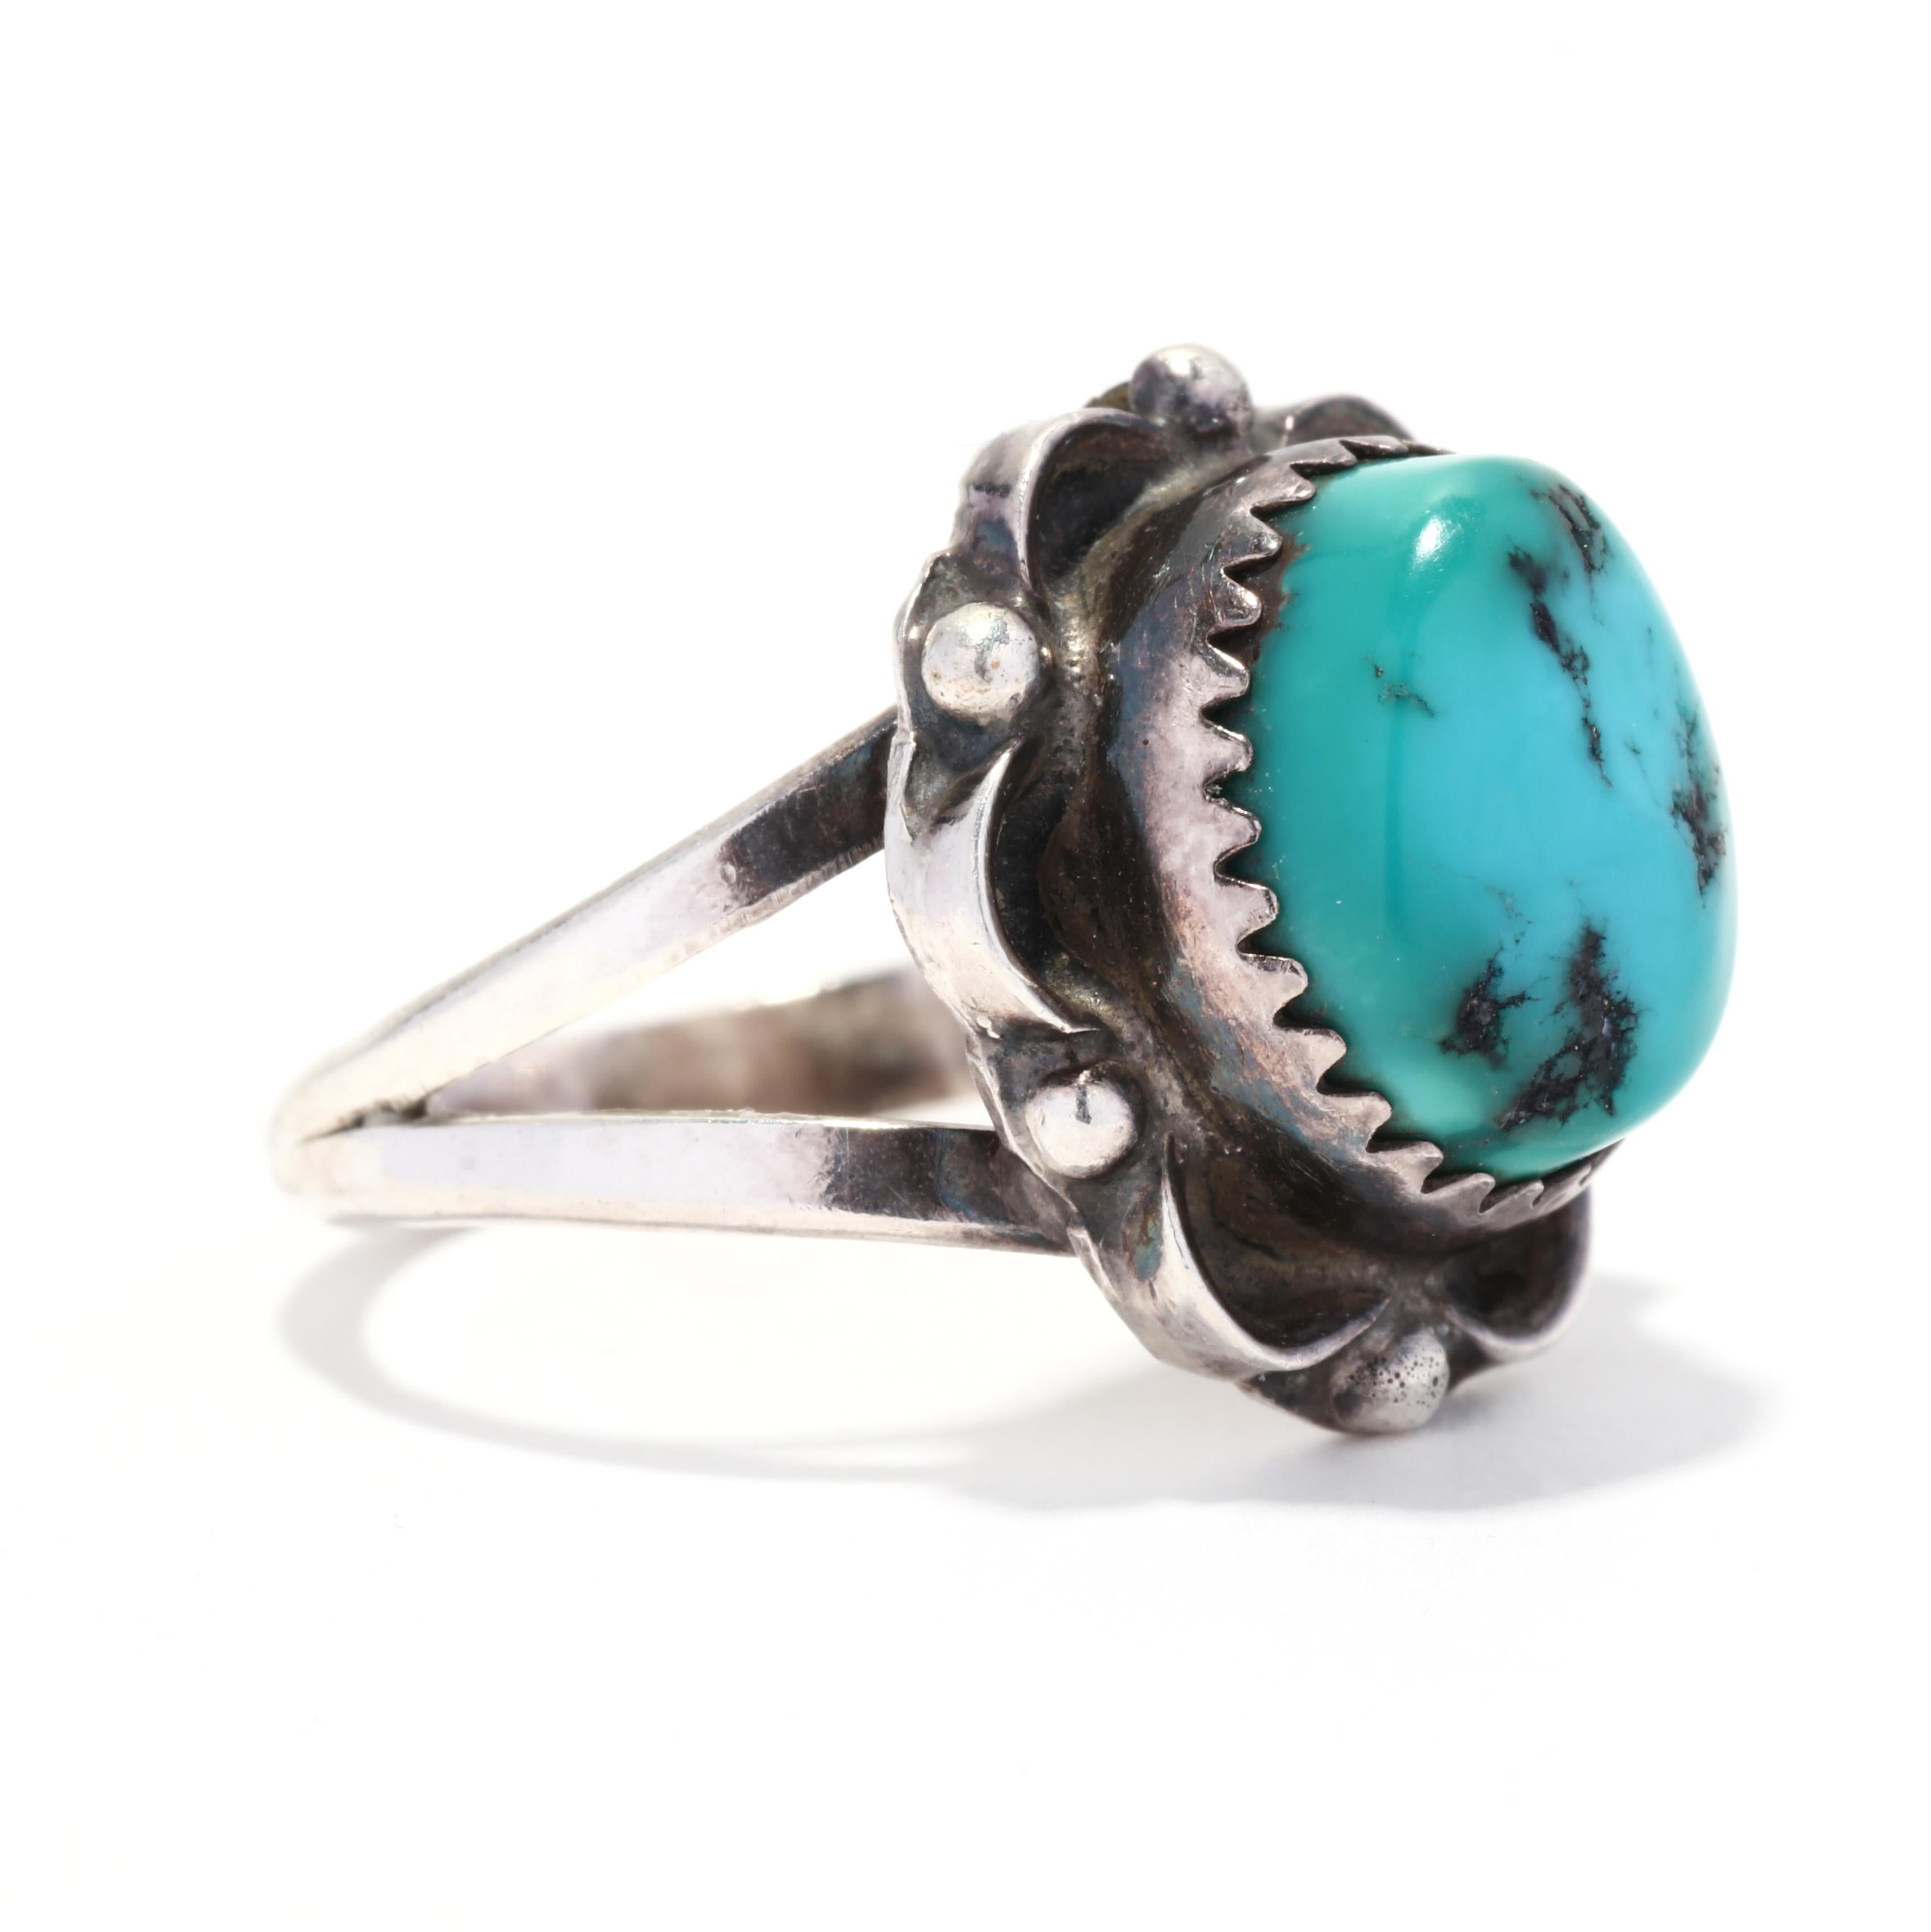 A Southwestern sterling silver and turquoise ring.  This turquoise flower ring features a central oval cabochon turquoise, in a scalloped setting.  It is stamped AMB Sterling.

Ring Size 6

Length: 8.4 mm

Ring off of finger: 5/8 in.

Weight: 3 dwt.